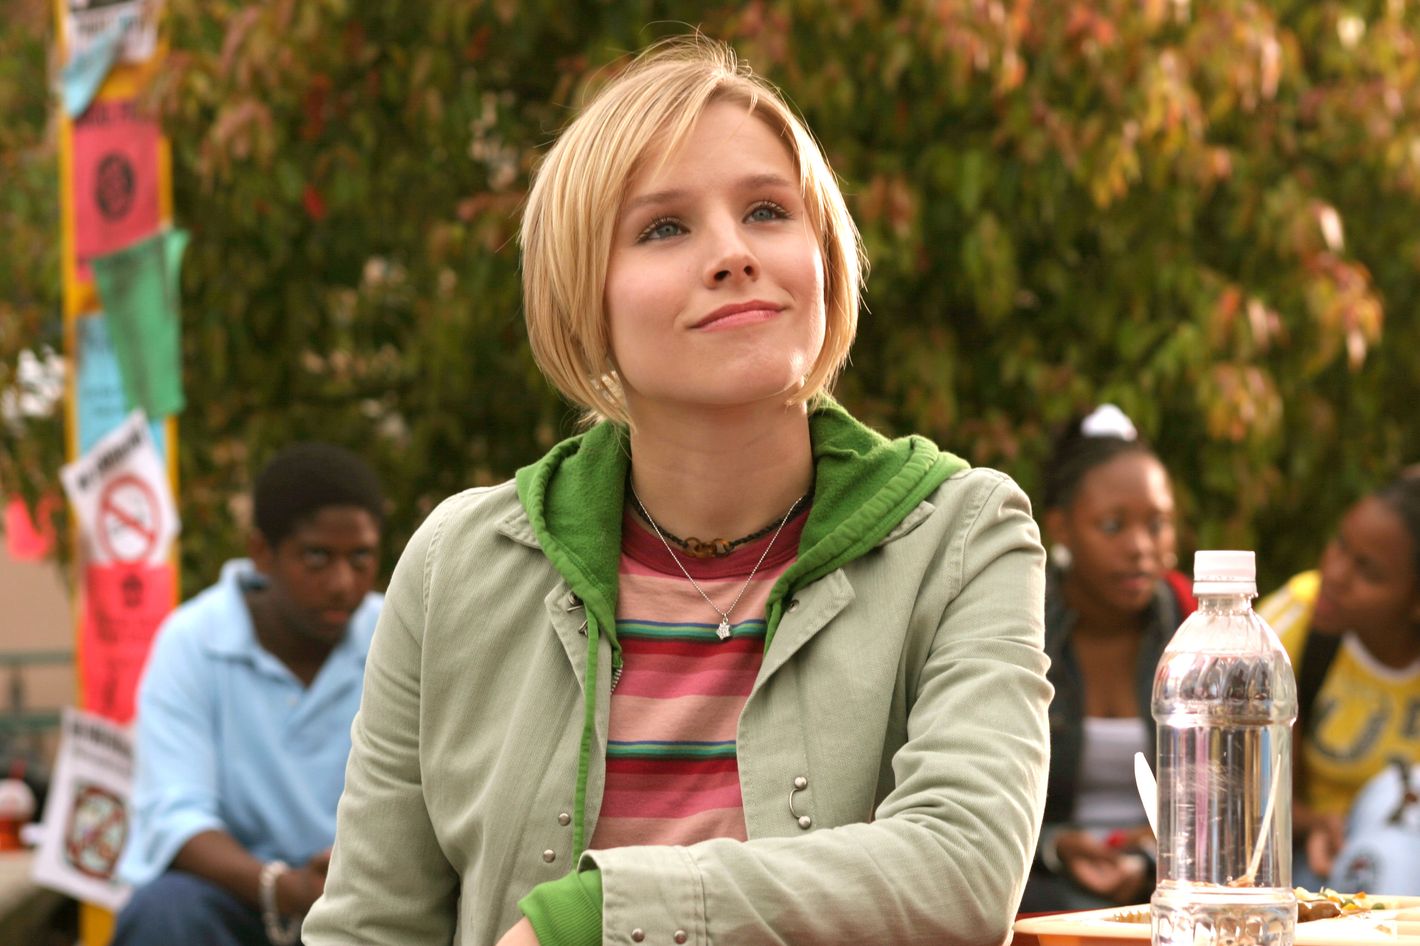 How to have a character full of flaws, with Veronica Mars